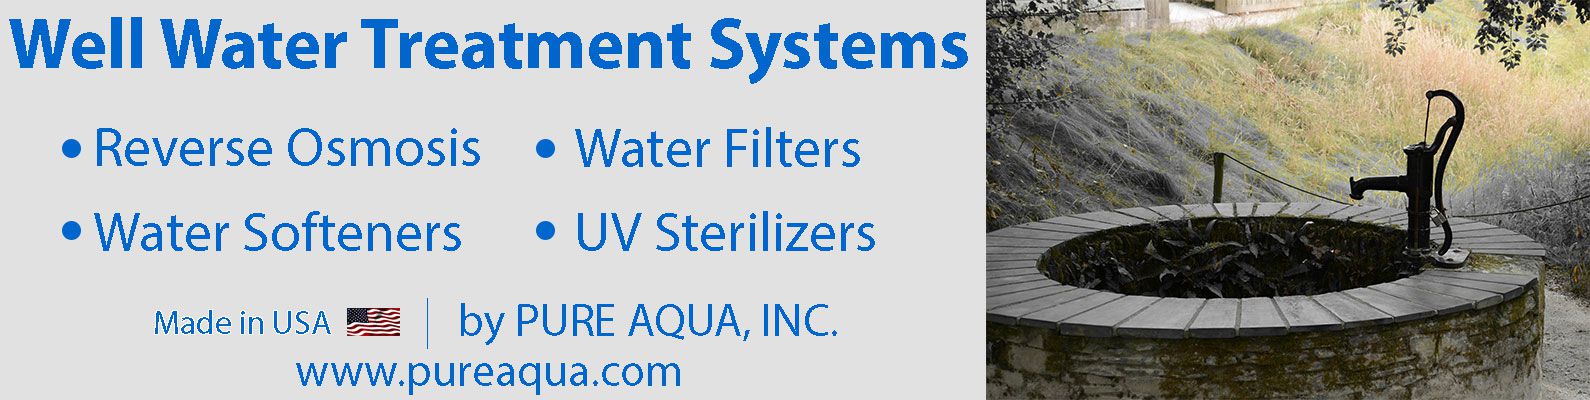 Well water treatment systems